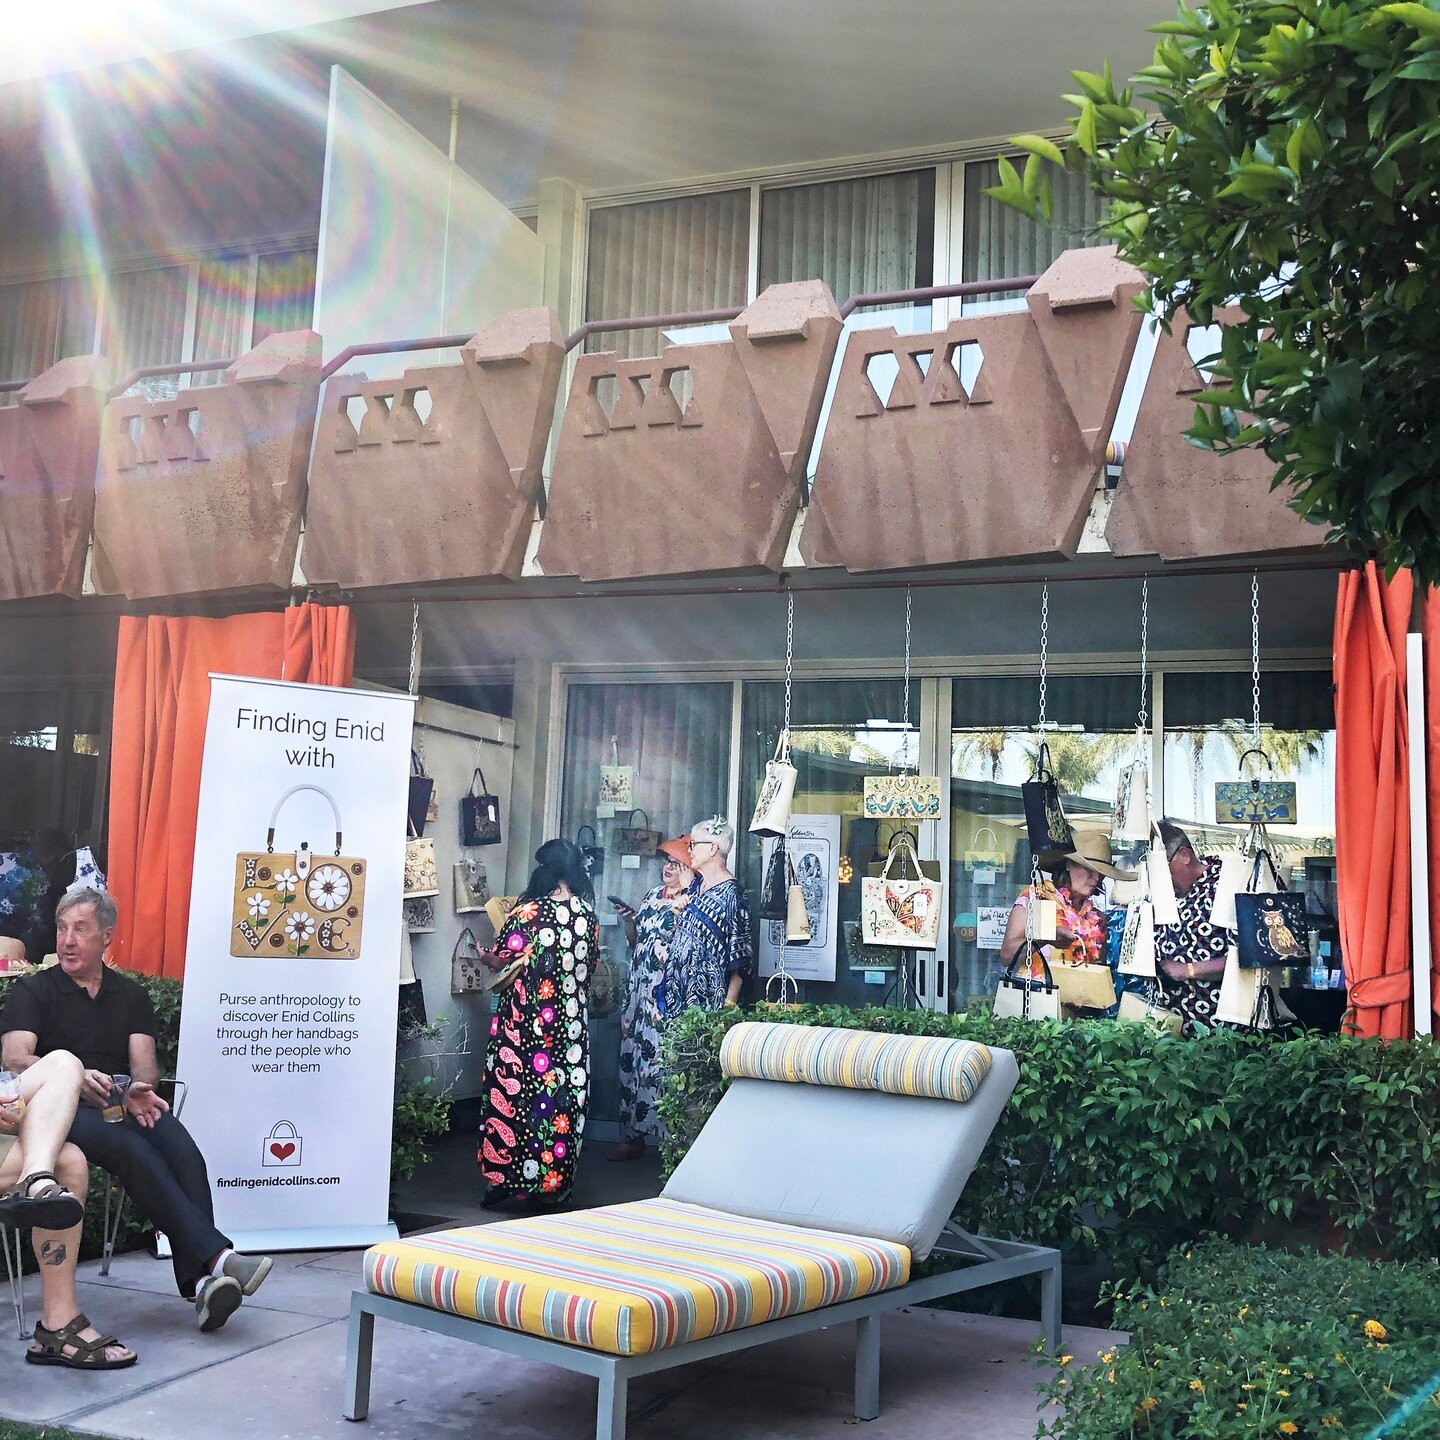 Our pop-up exhibit &amp; shop is back home after a jolly jaunt to Arizona Tiki Oasis at the splendid mid-century modern @hotelvalleyho. Had a fine time meeting all the kool kats &amp; kittens - and soaking up the Polynesian Pop vibe!

#arizonatikioas